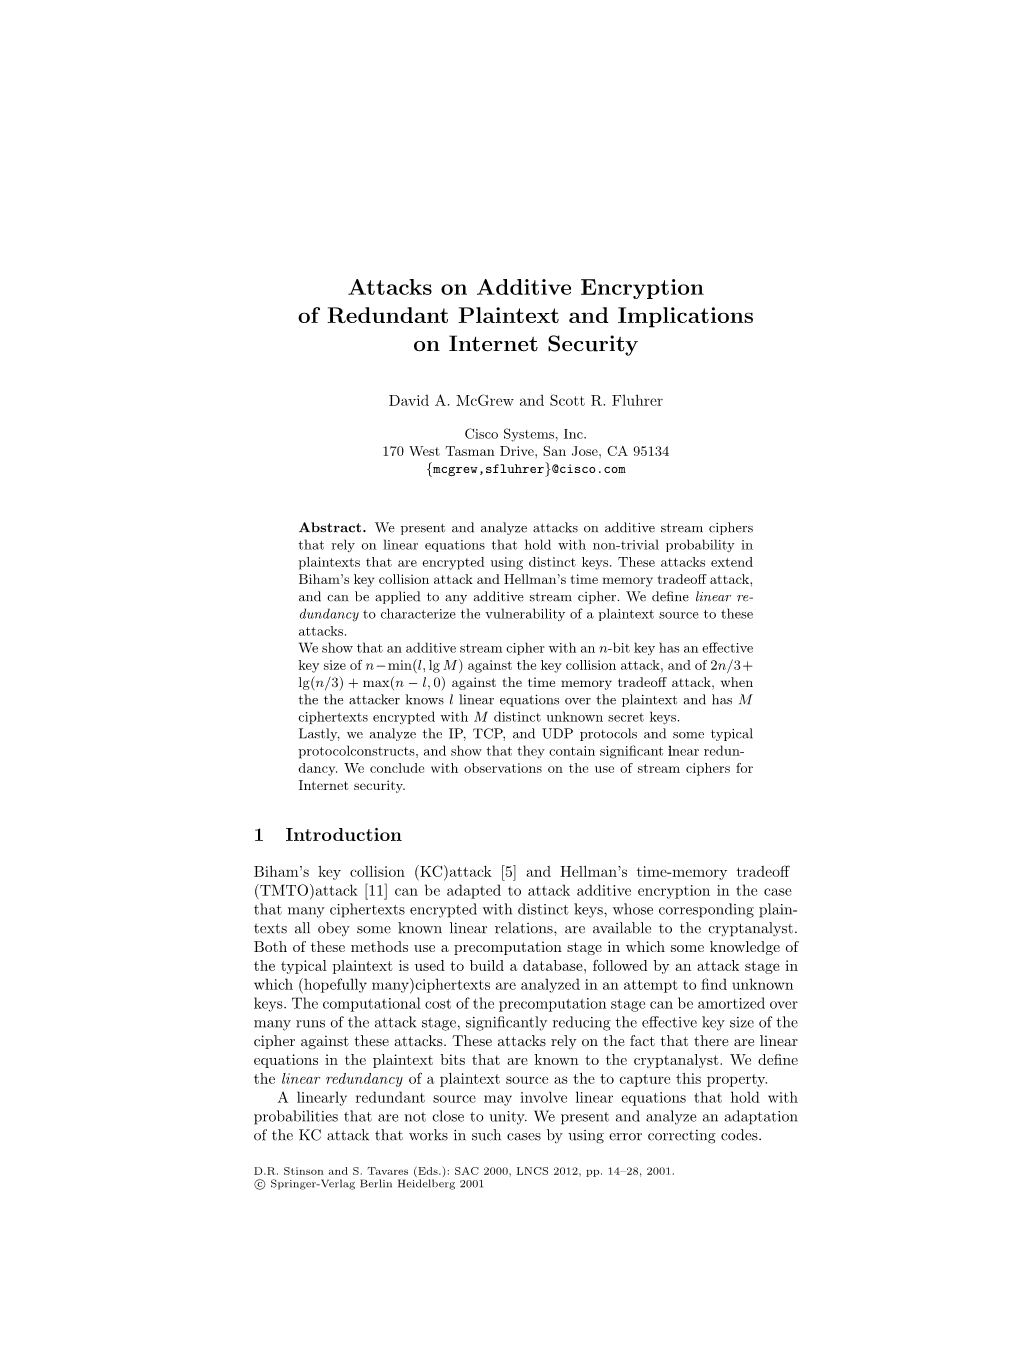 Attacks on Additive Encryption of Redundant Plaintext and Implications on Internet Security